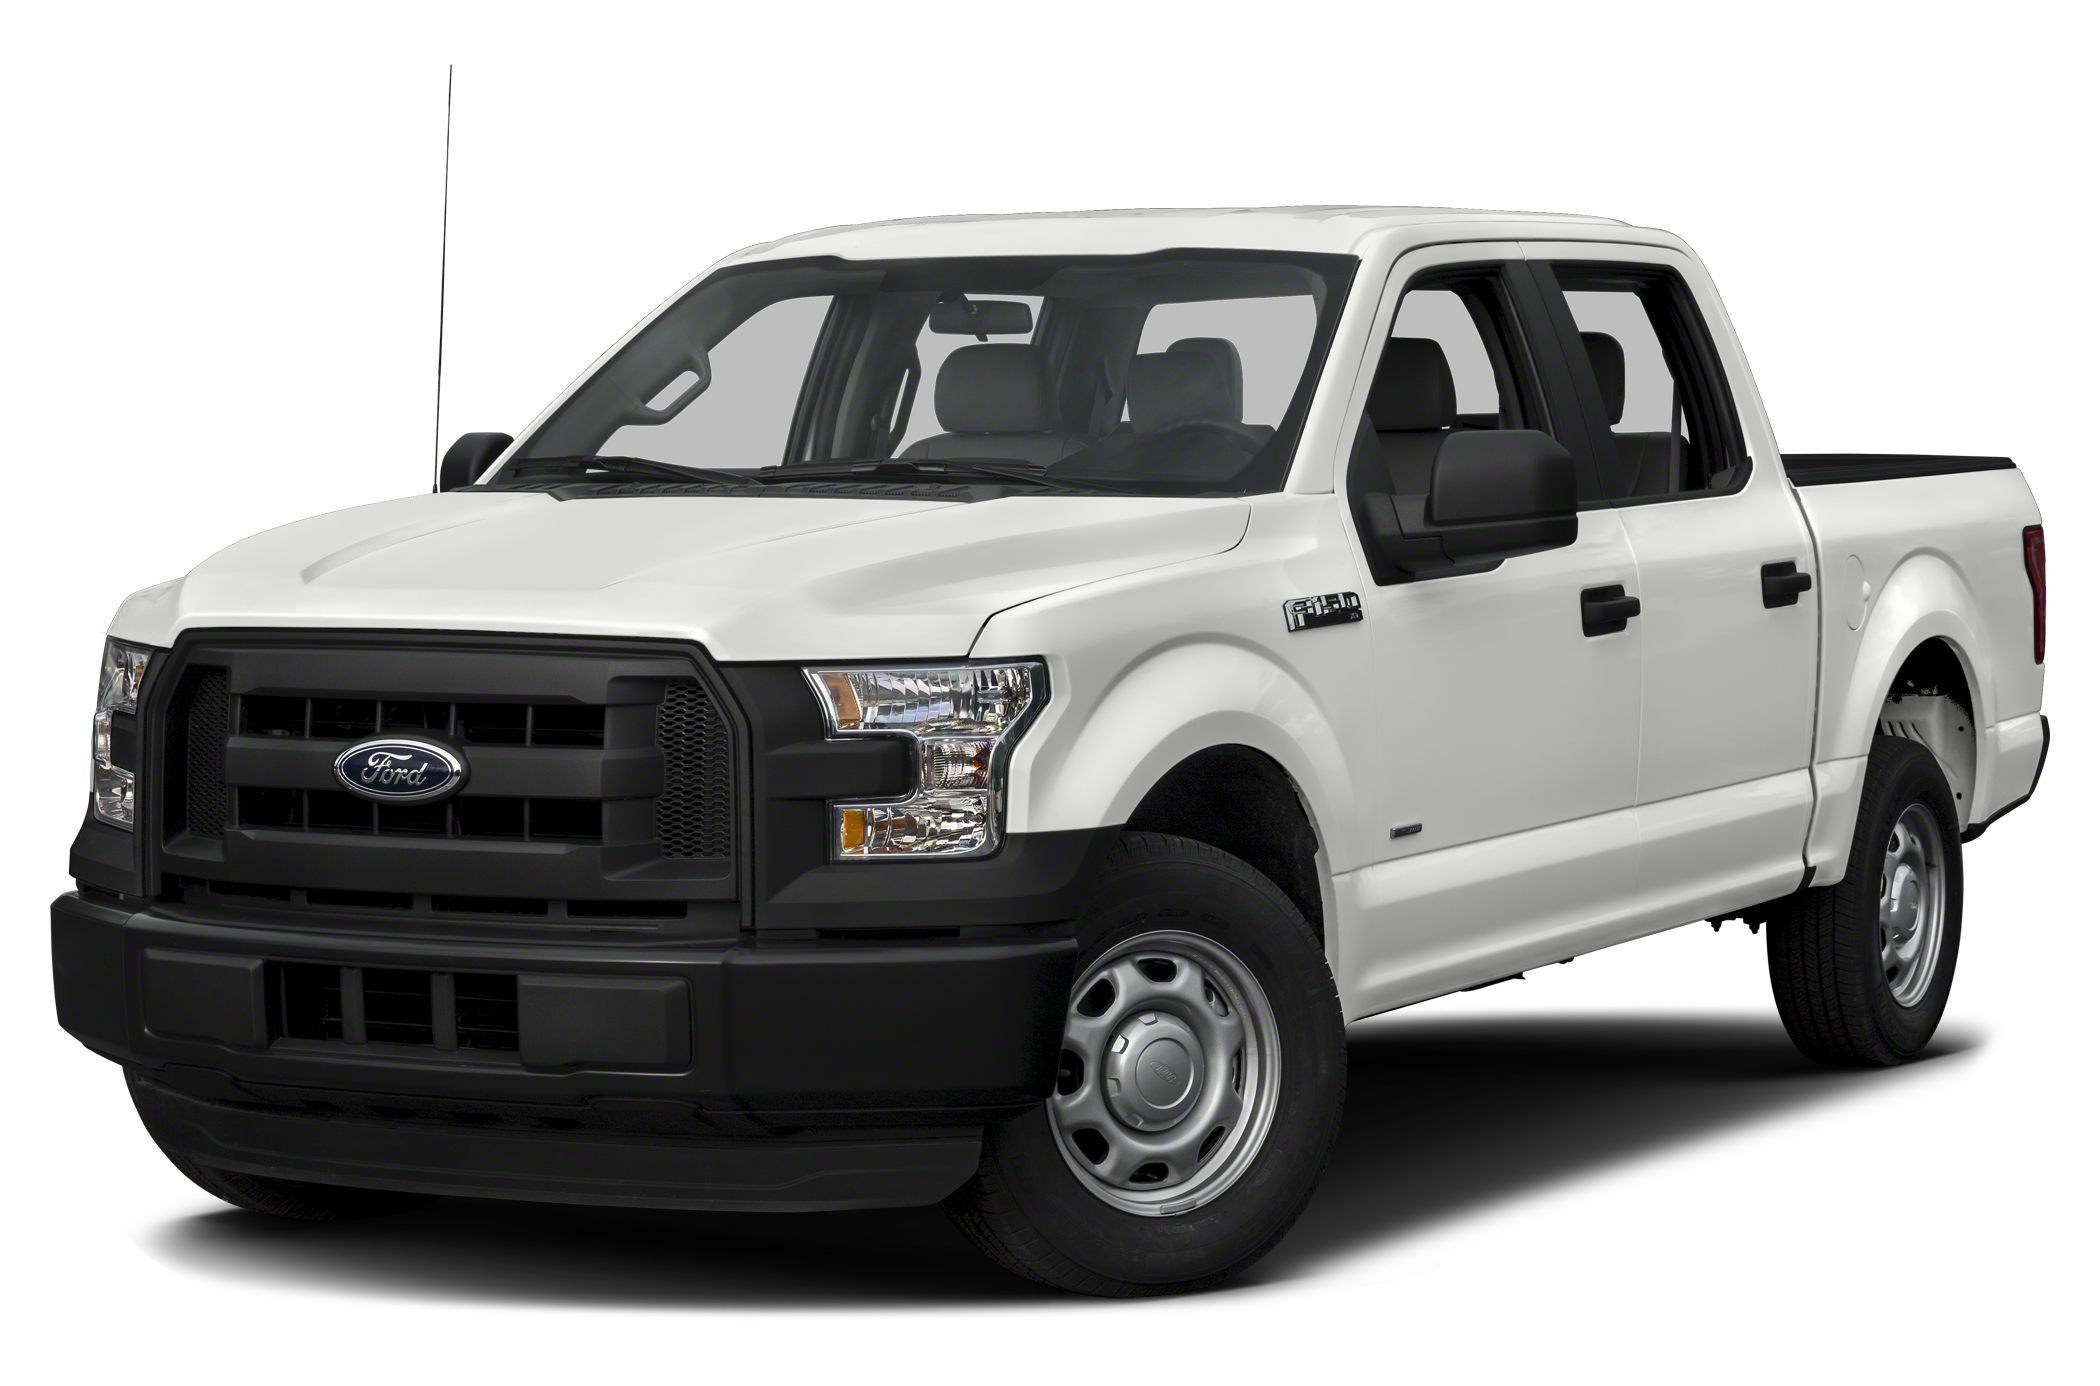 2015 Ford F 150 Xl 4x4 Supercrew Cab Styleside 5 5 Ft Box 145 In Wb Pictures